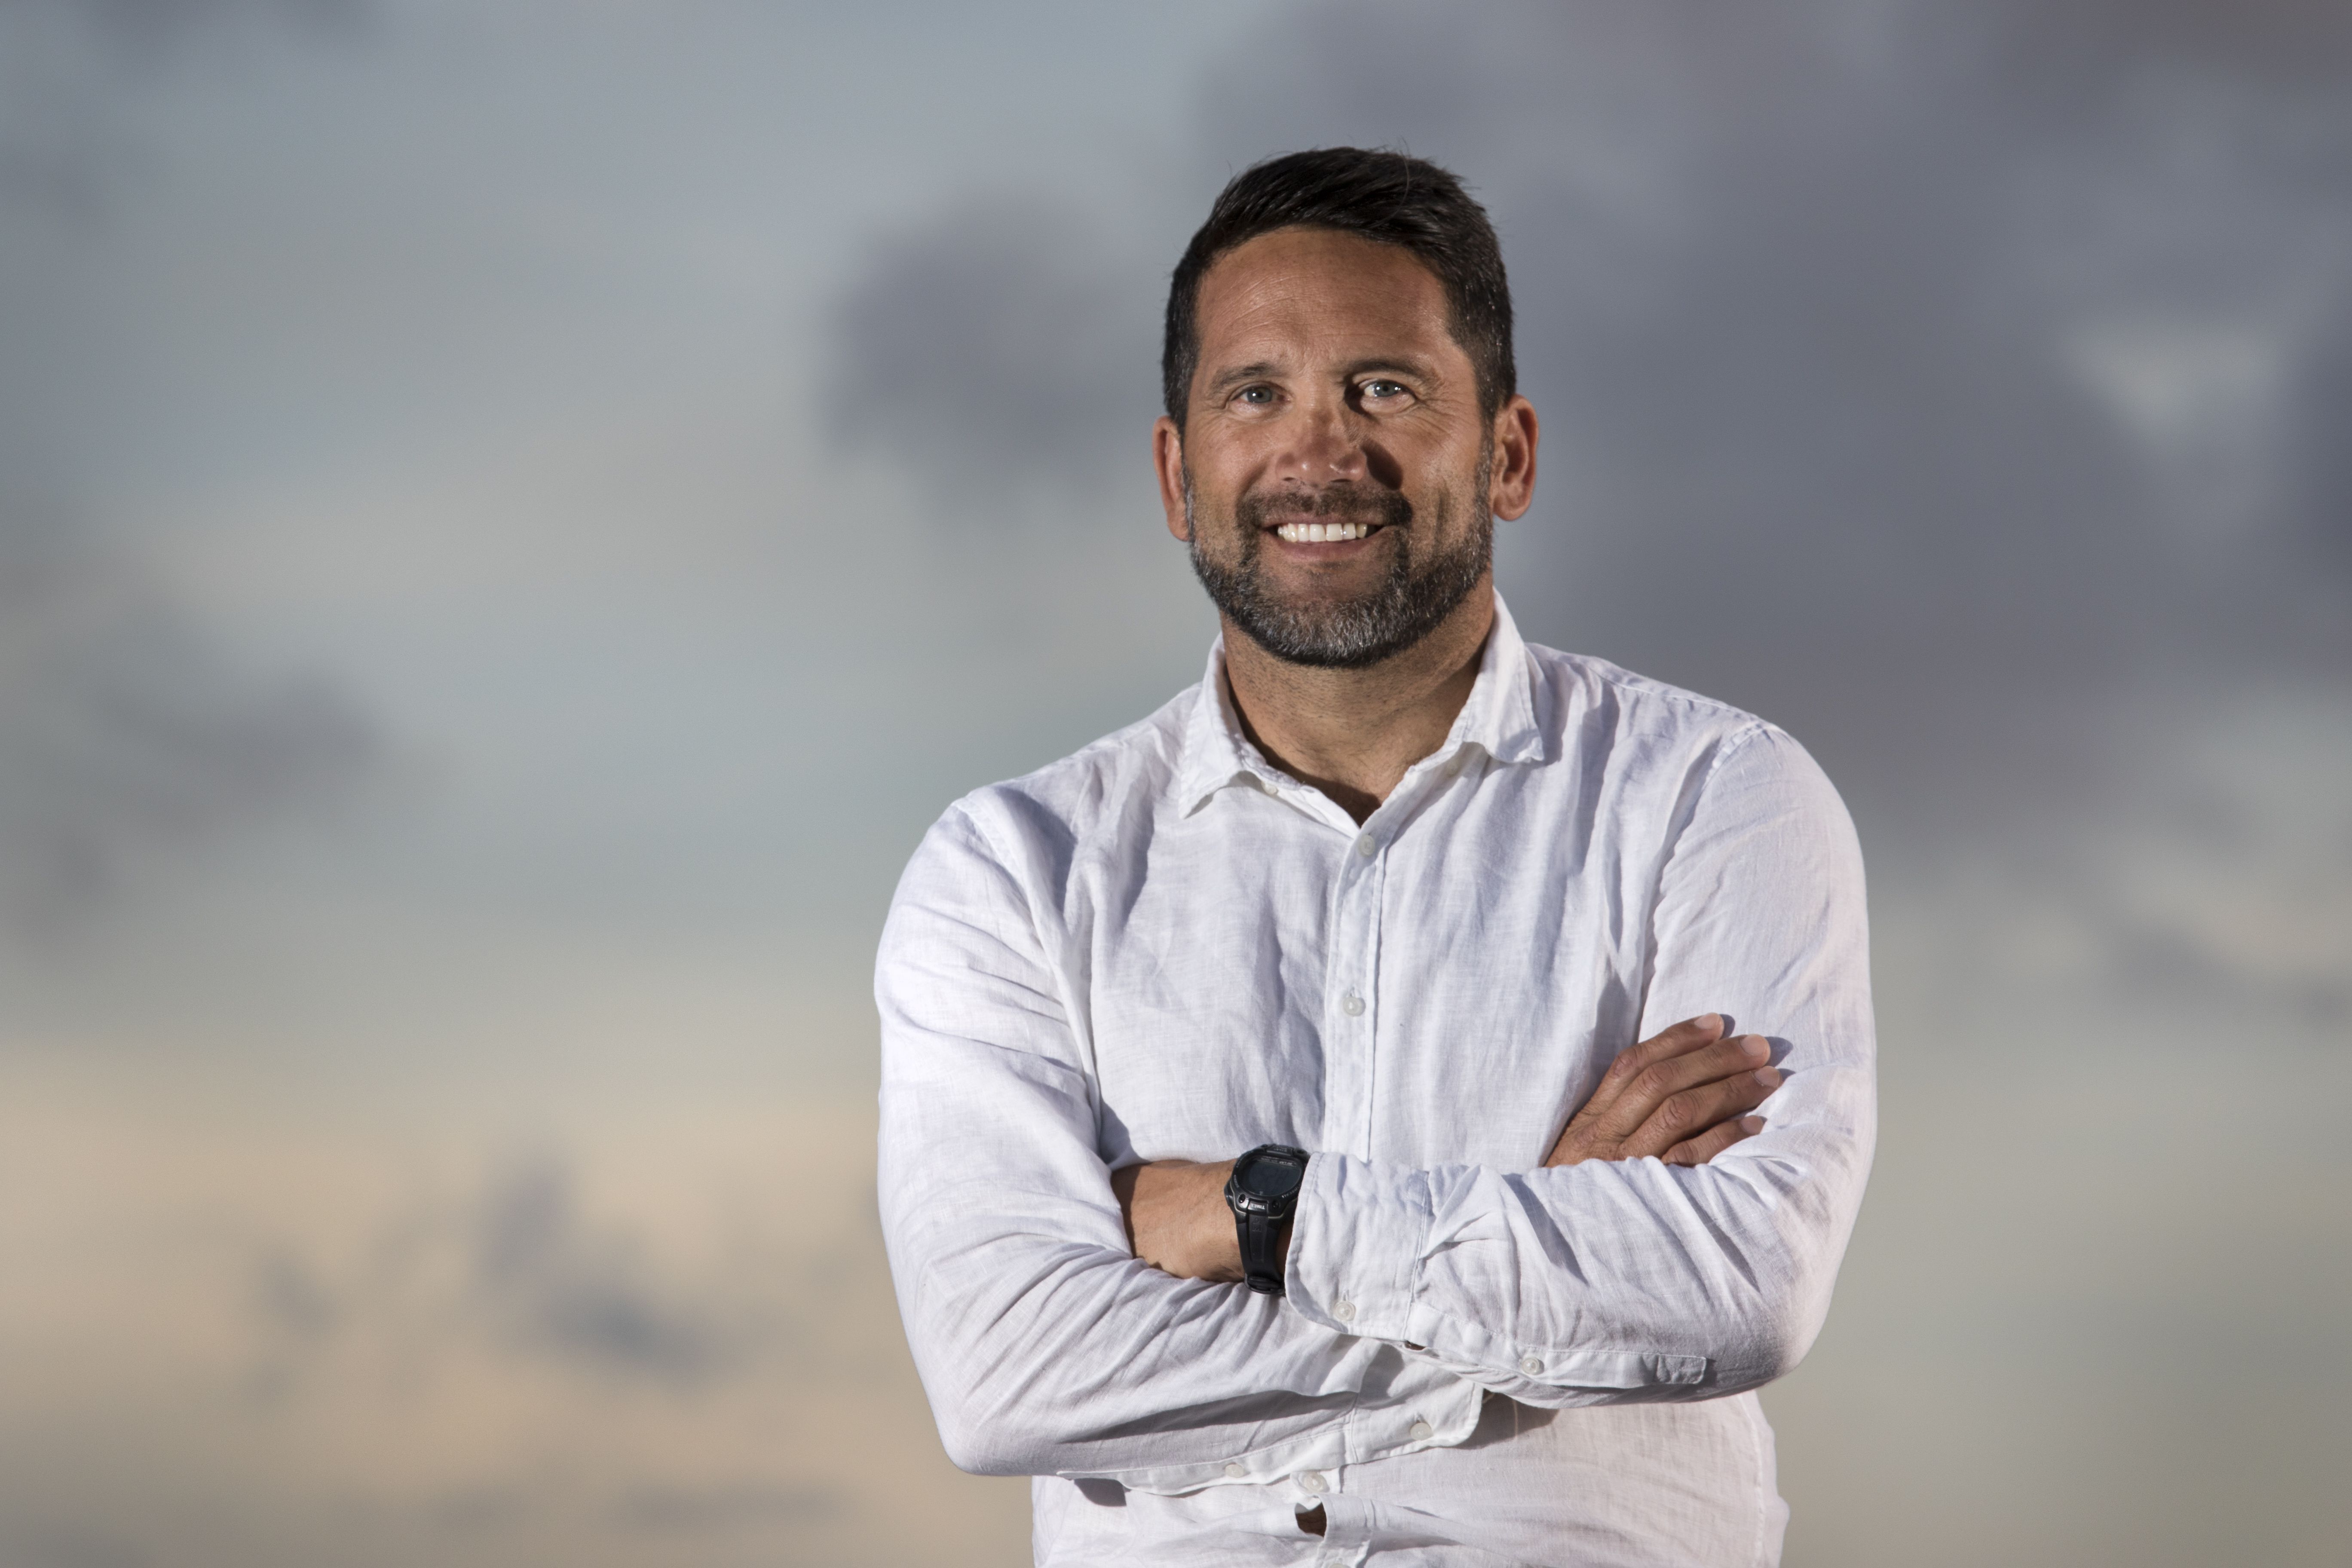 Connecting People for Good: Interview with Lance O'Sullivan